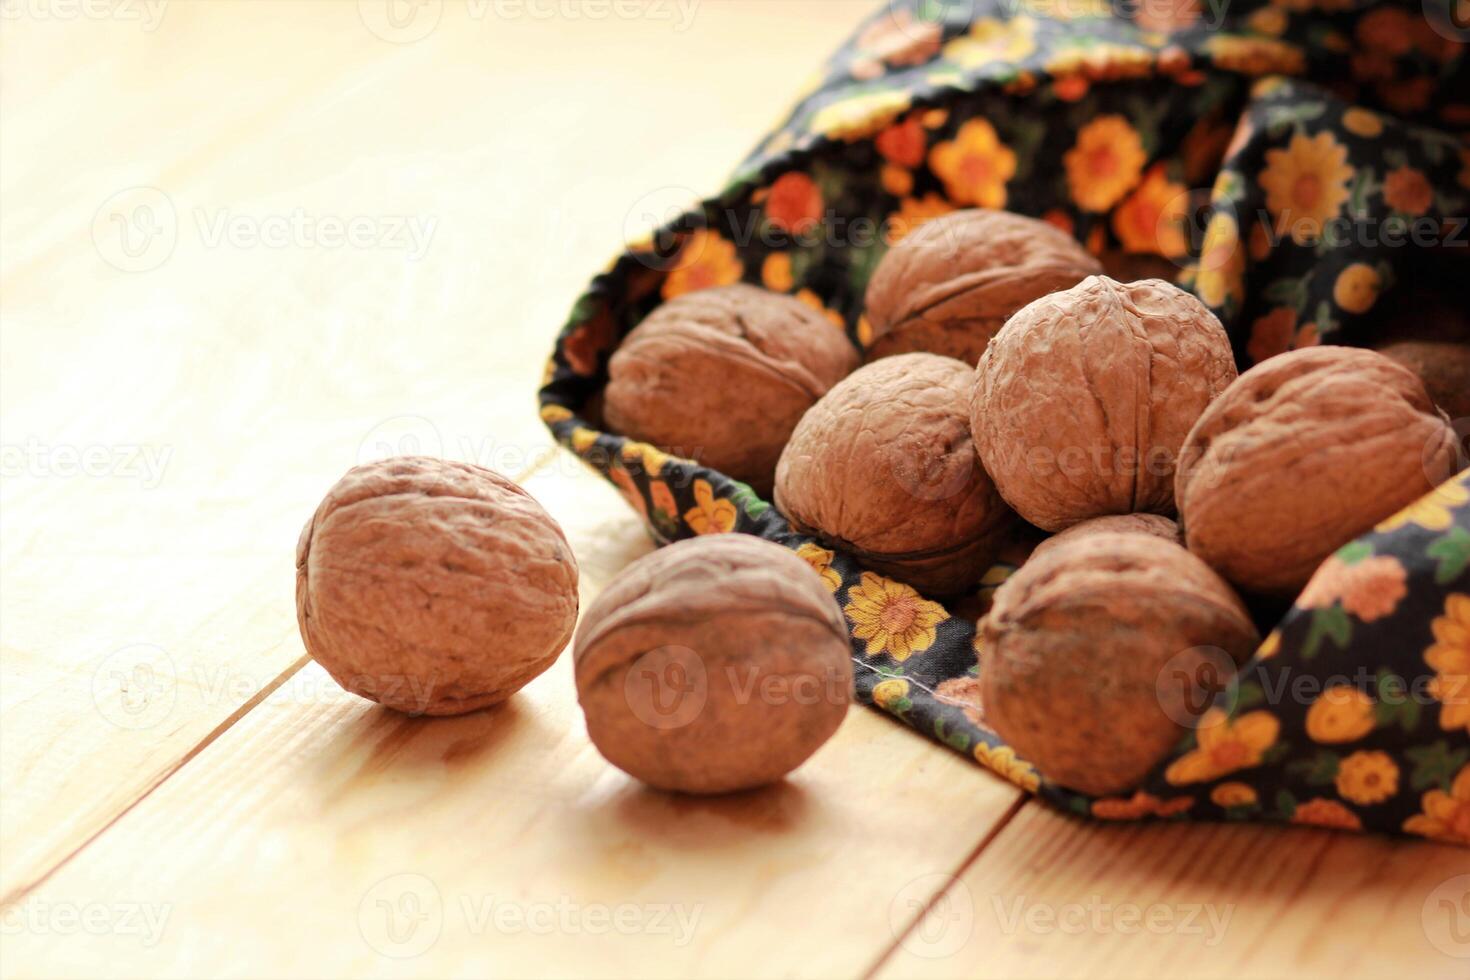 Walnuts scattered from floral pattern bag on sunlit light brown wooden floor photo